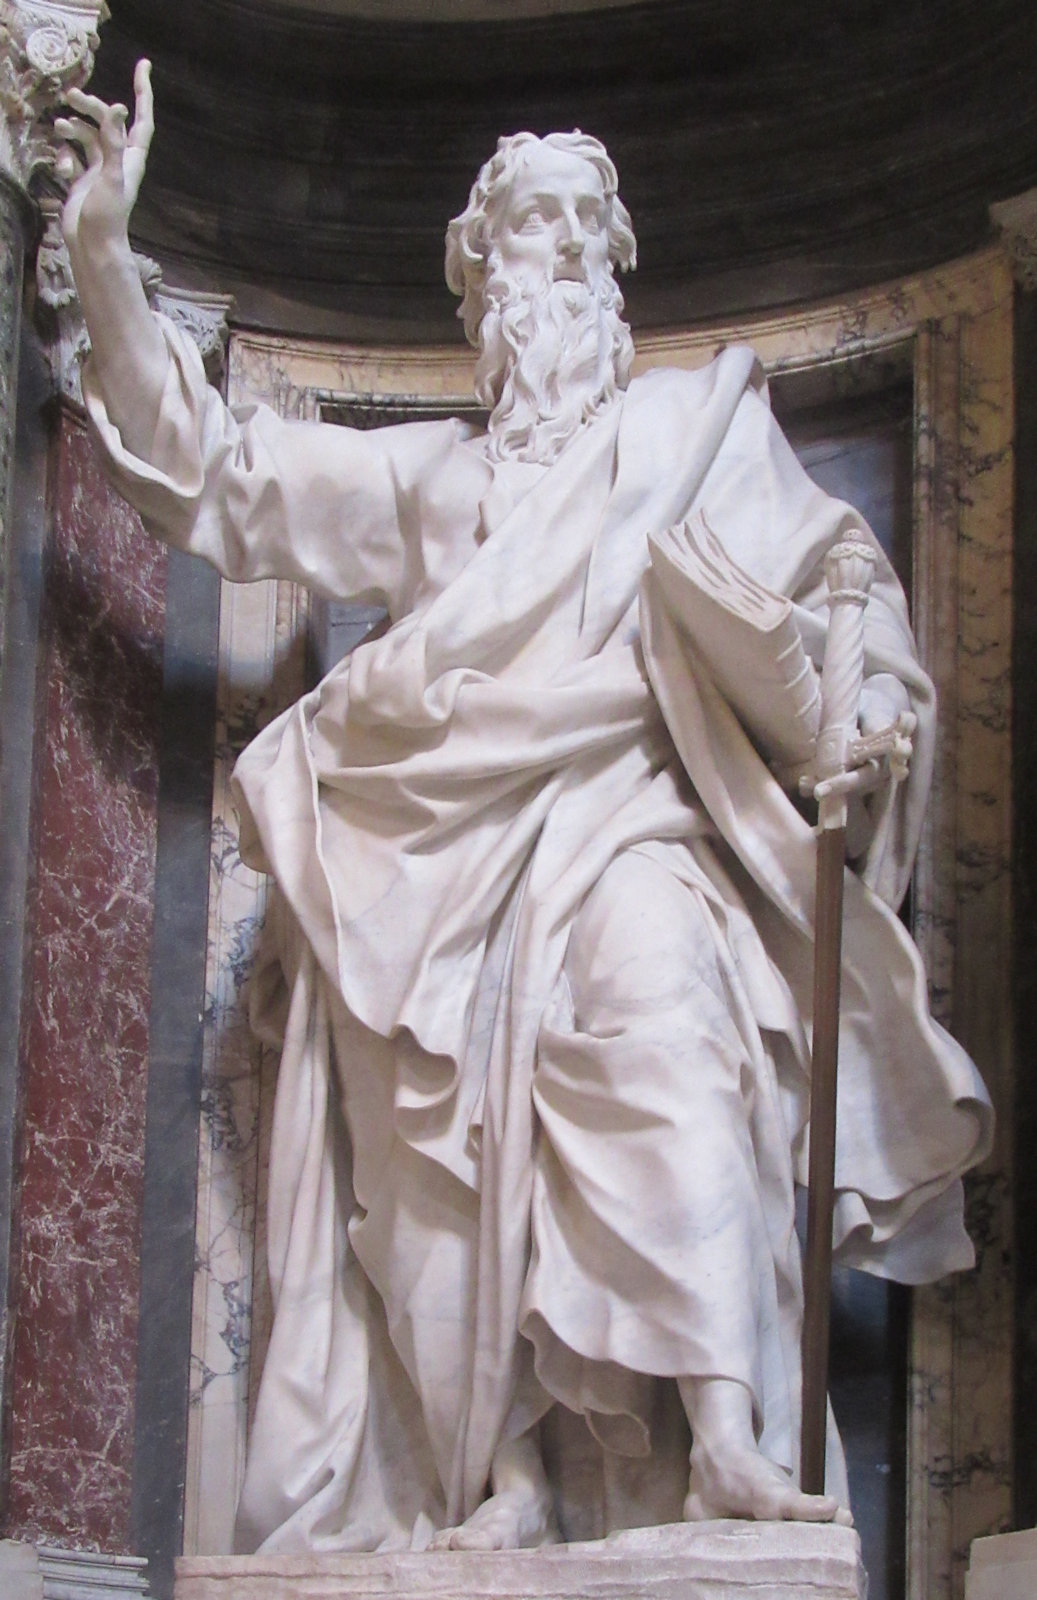 Pierre-Étienne Monnot: Statue, 1705 - 1711, in der Basilika San Giovanni in Laterano in Rom